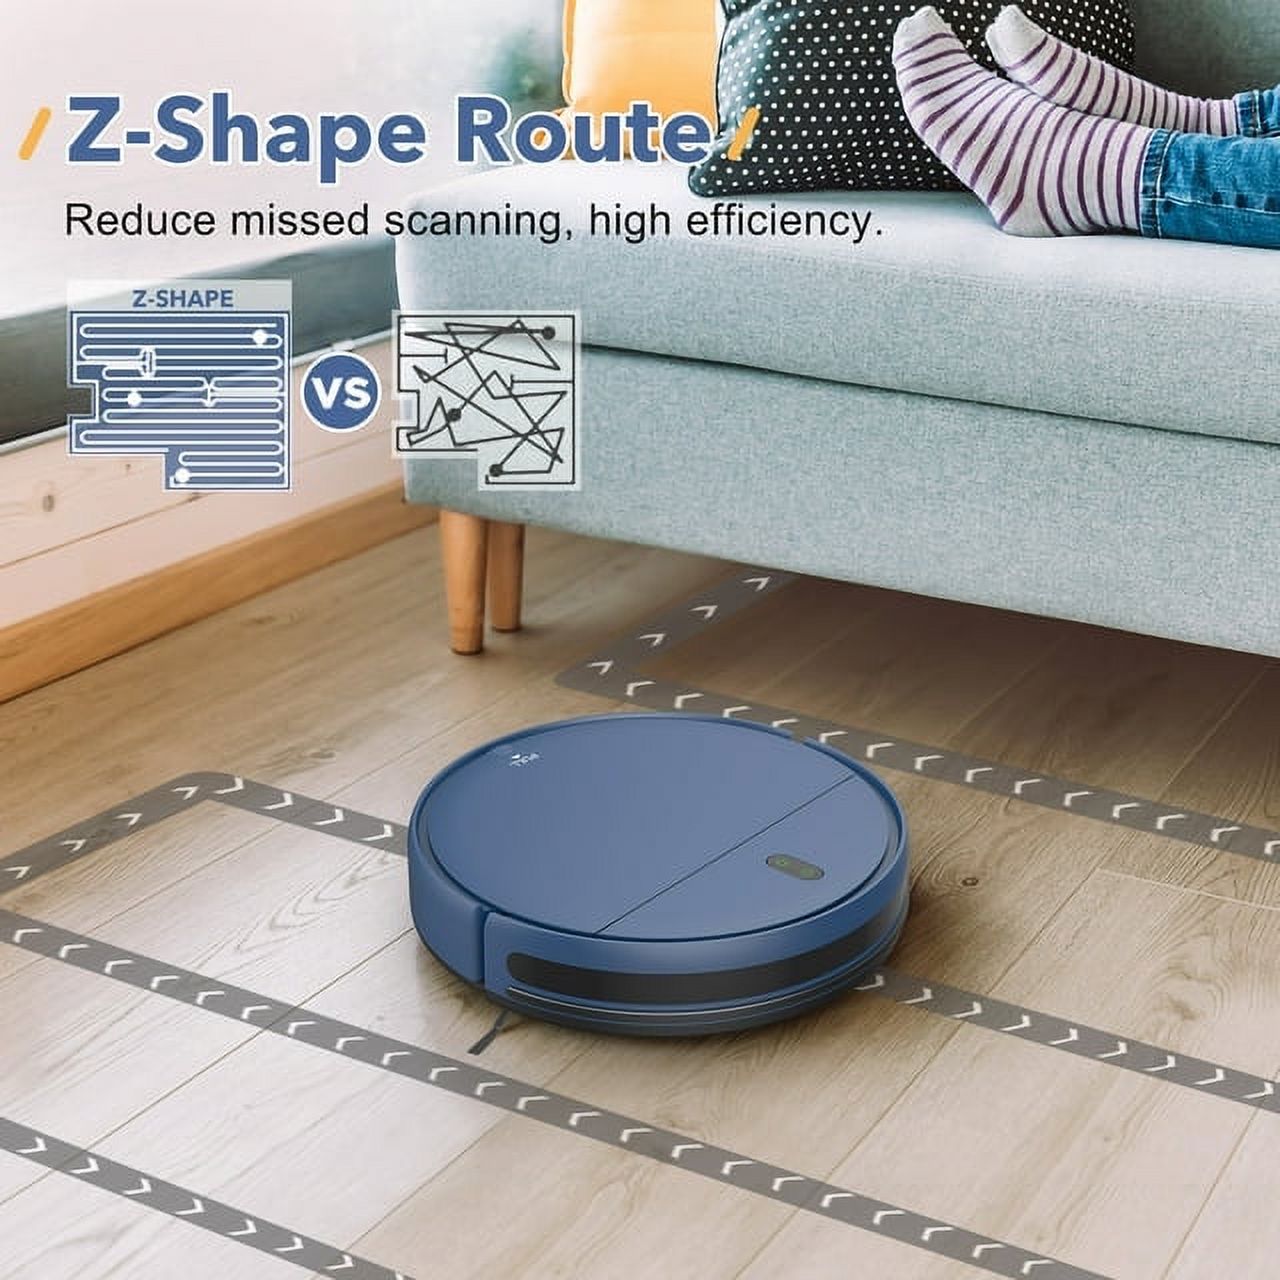 ONSON Robot Vacuum Cleaner, Robot Vacuum and Mop Combo with WIFI / Alexa for Pet Hair and Hard Floor - image 3 of 9